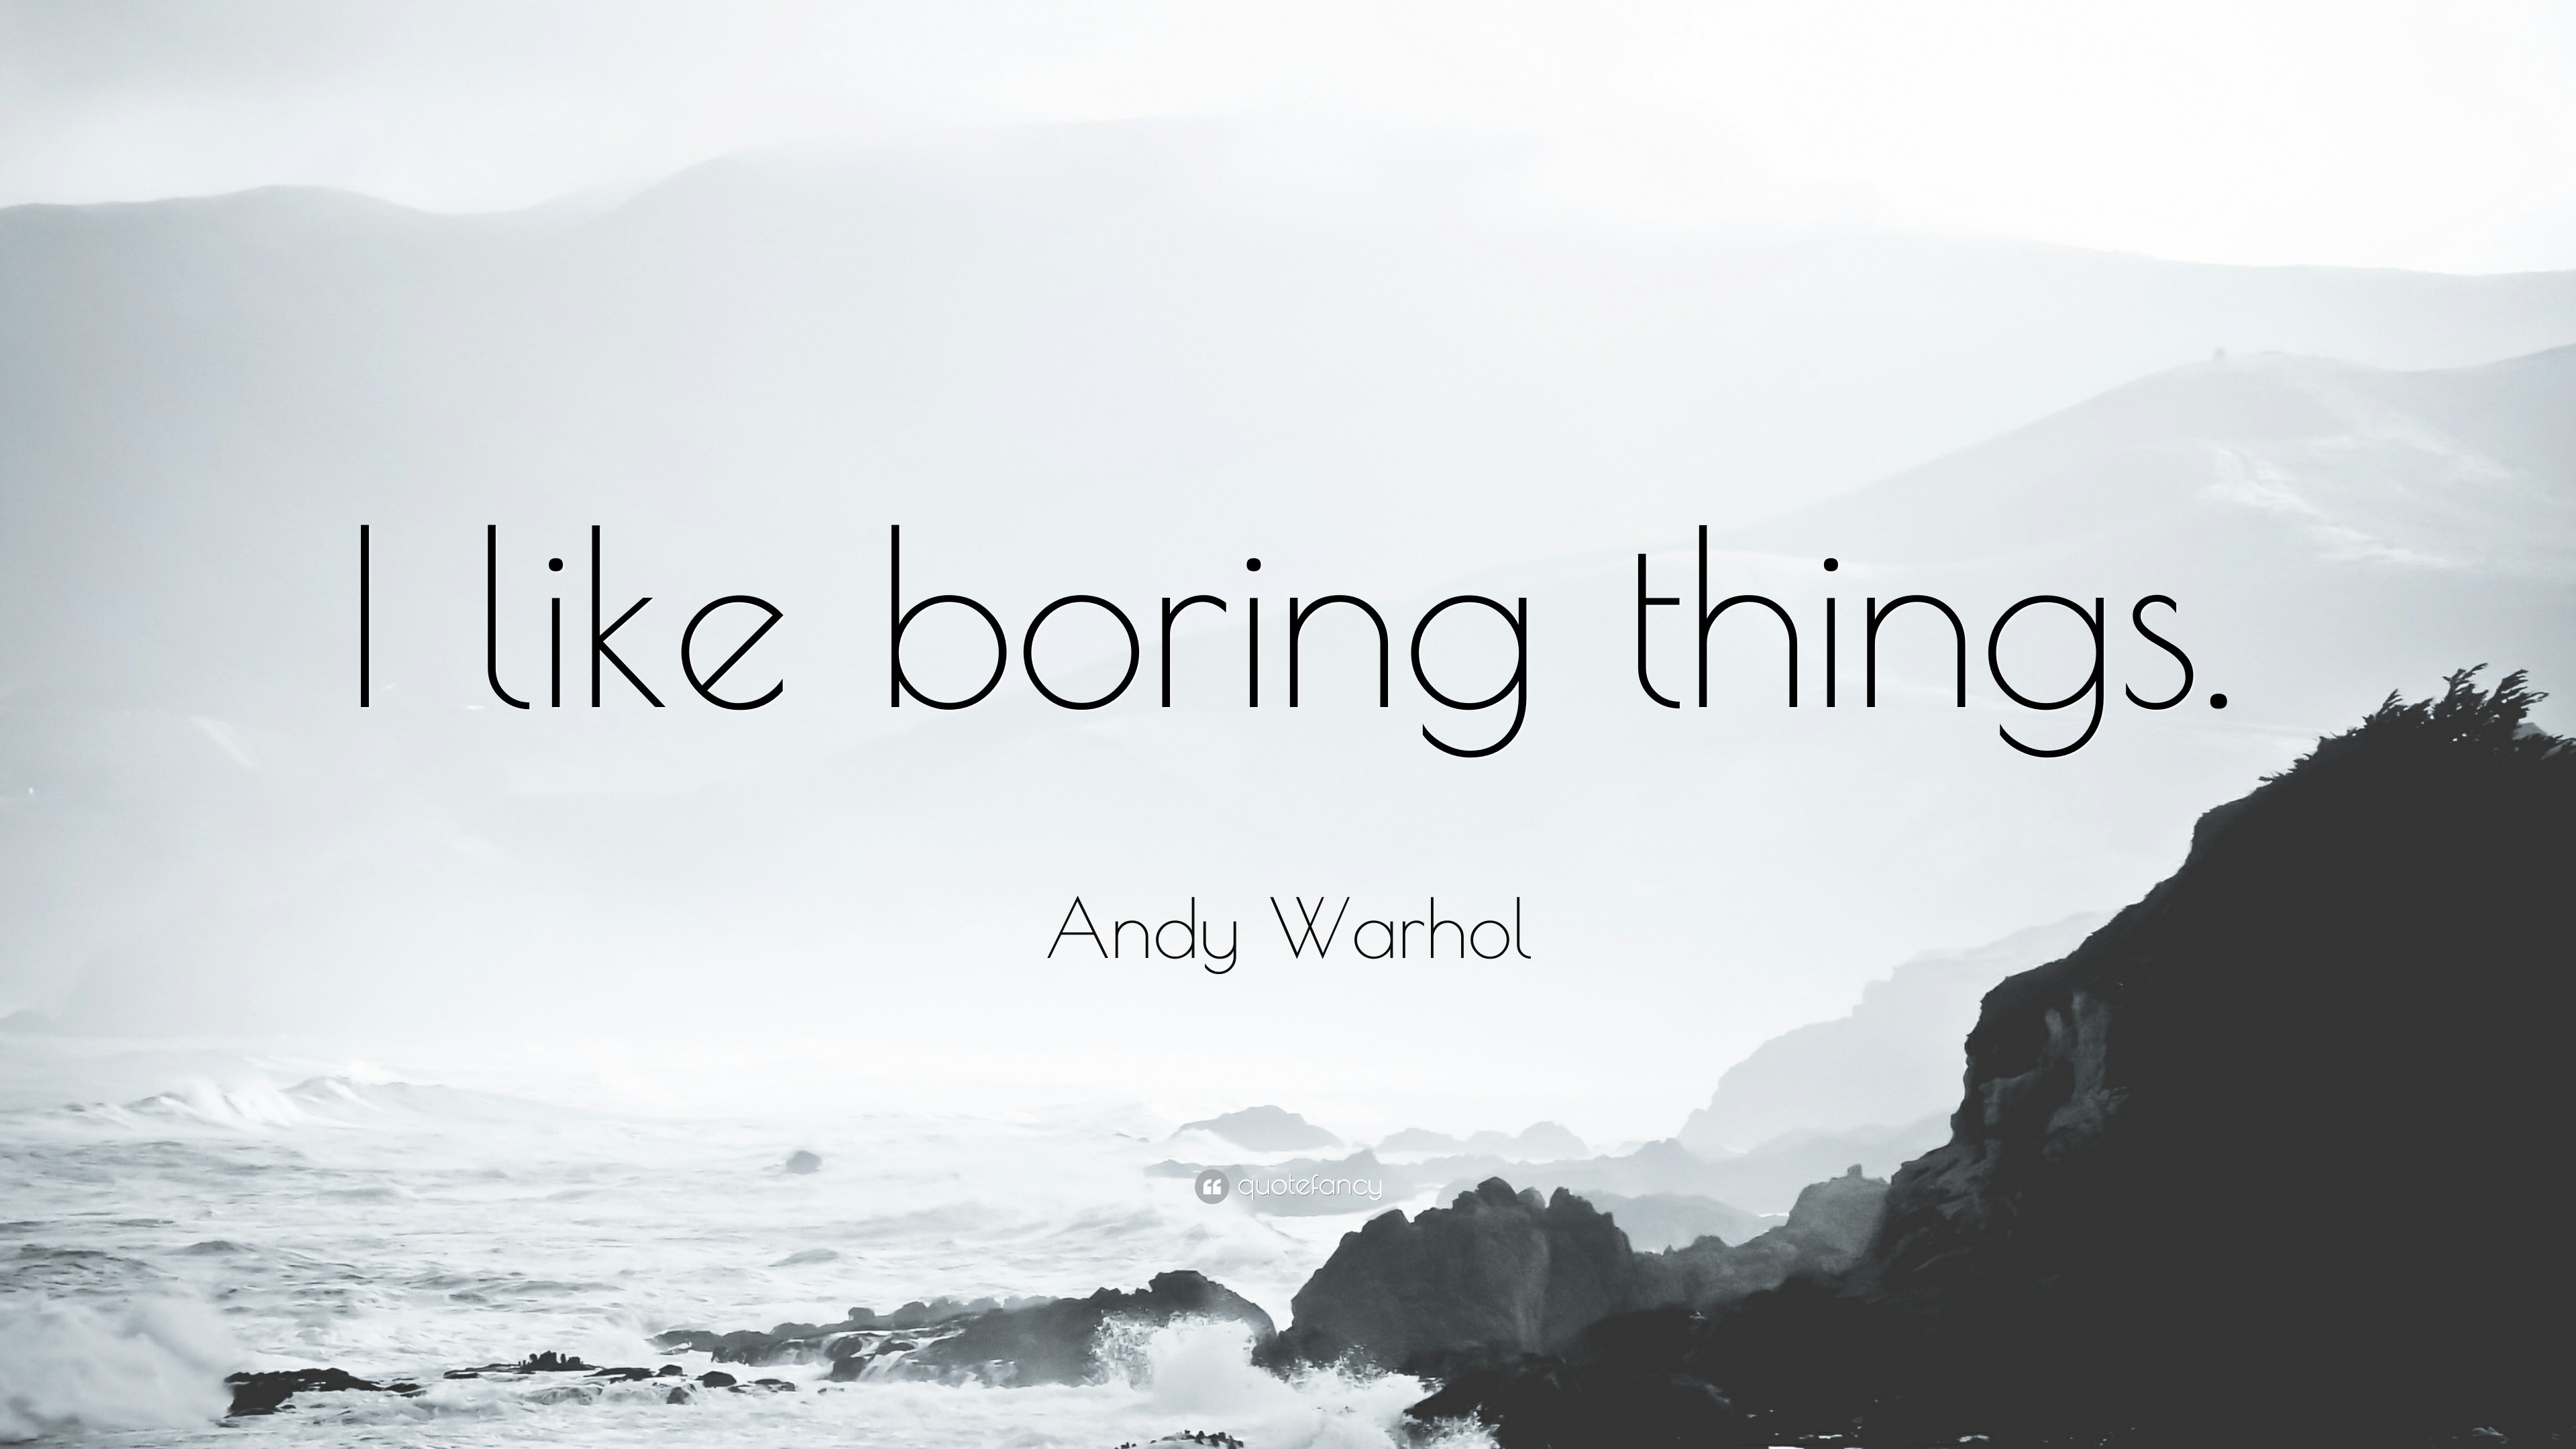 3840x2160 Andy Warhol Quote: “I like boring things.”